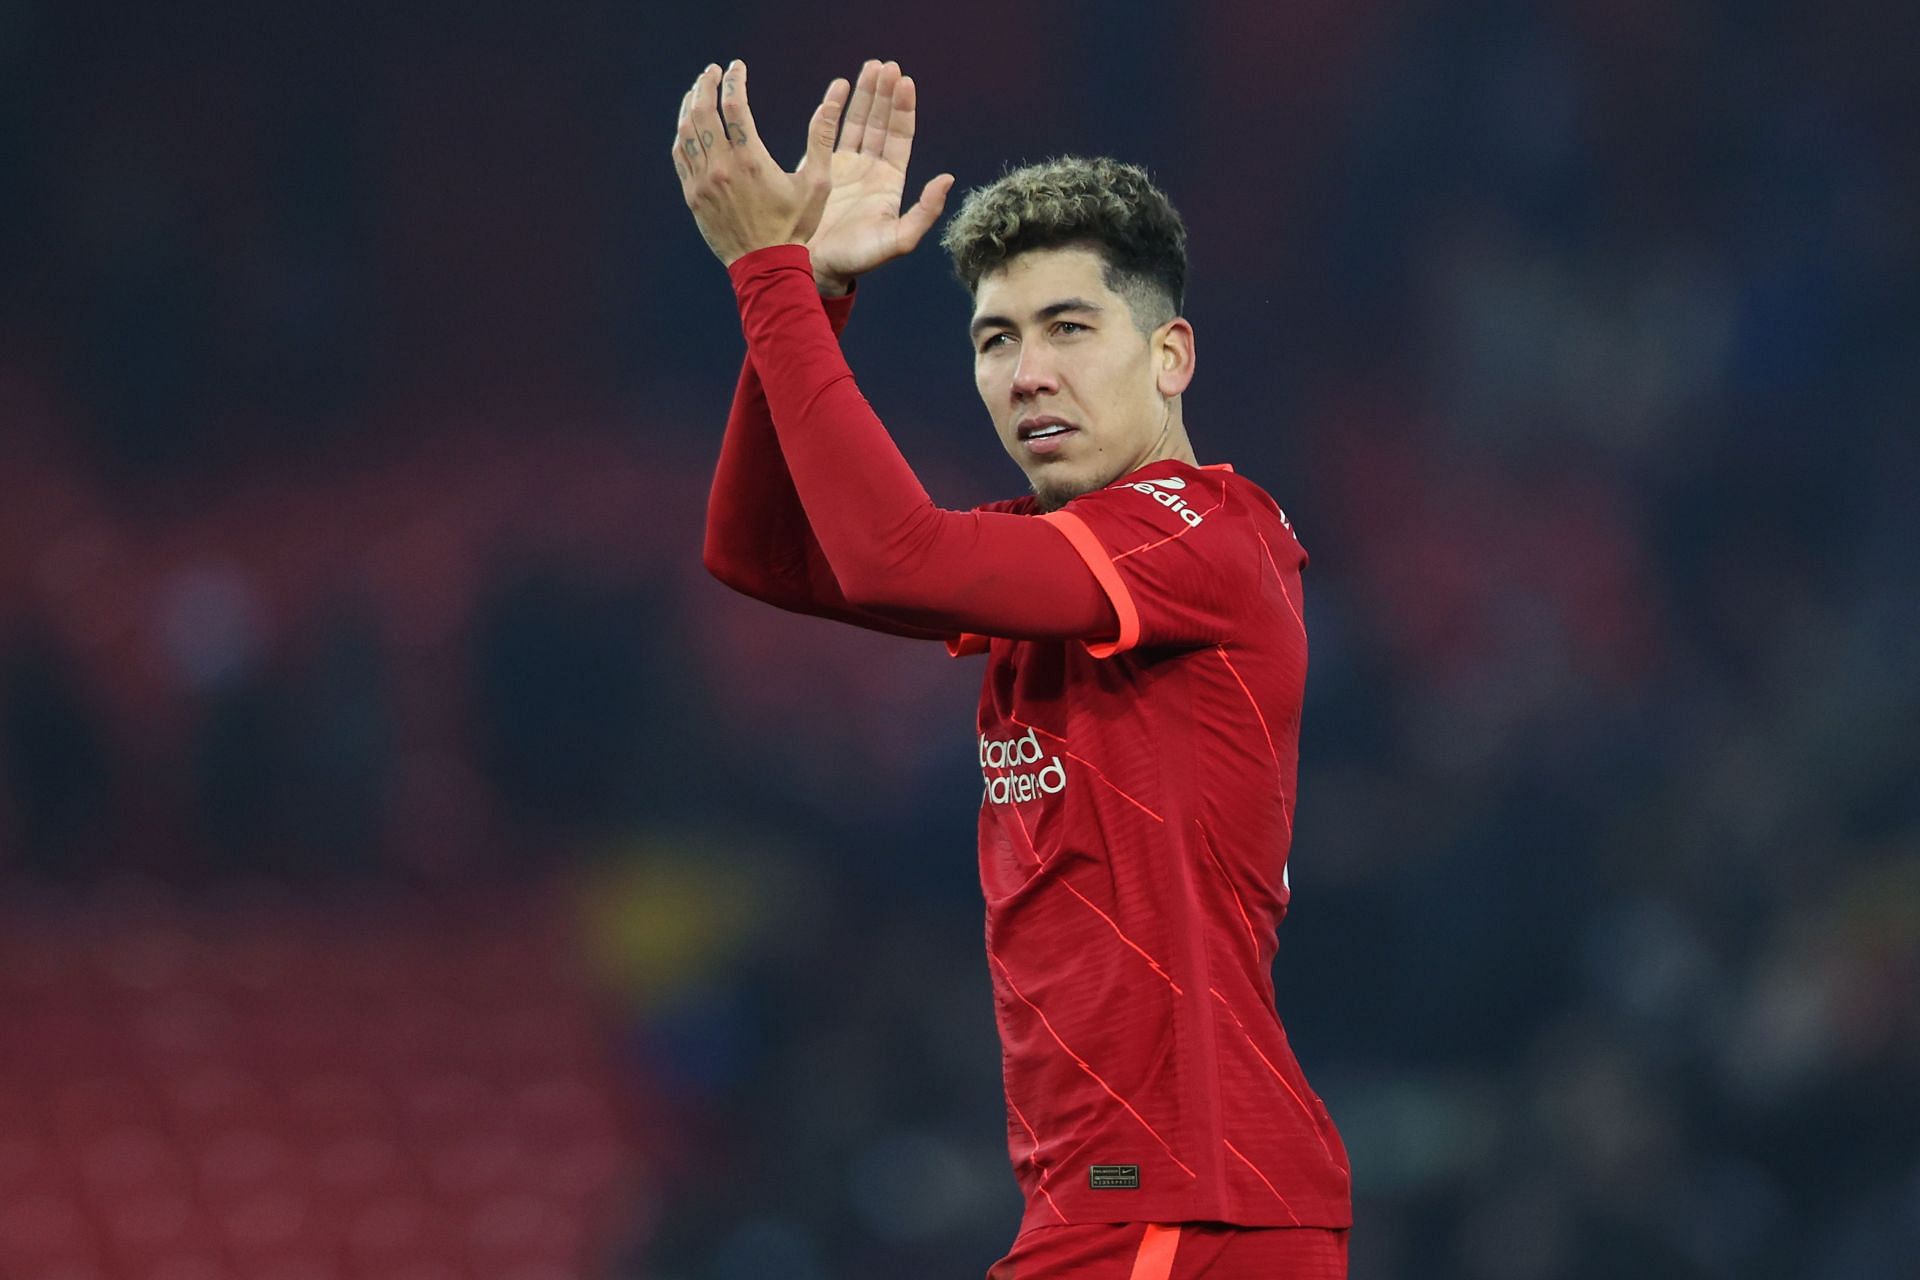 Roberto Firmino has been a key player for Liverpool after arriving in 2015.